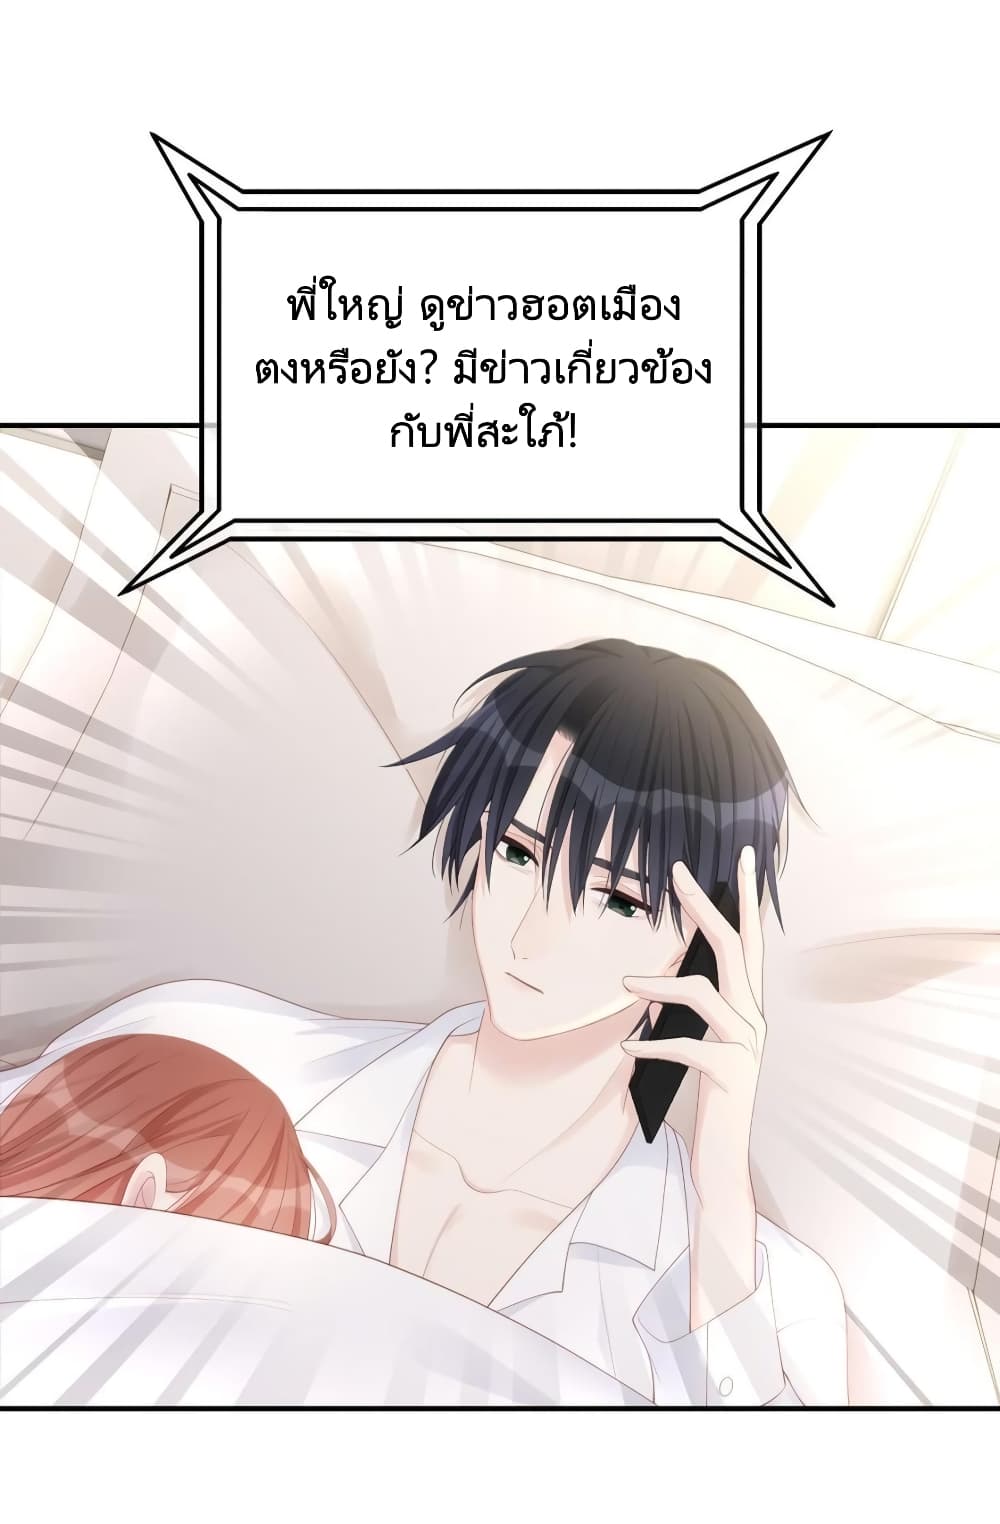 Gonna Spoil You ตอนที่ 77 (20)